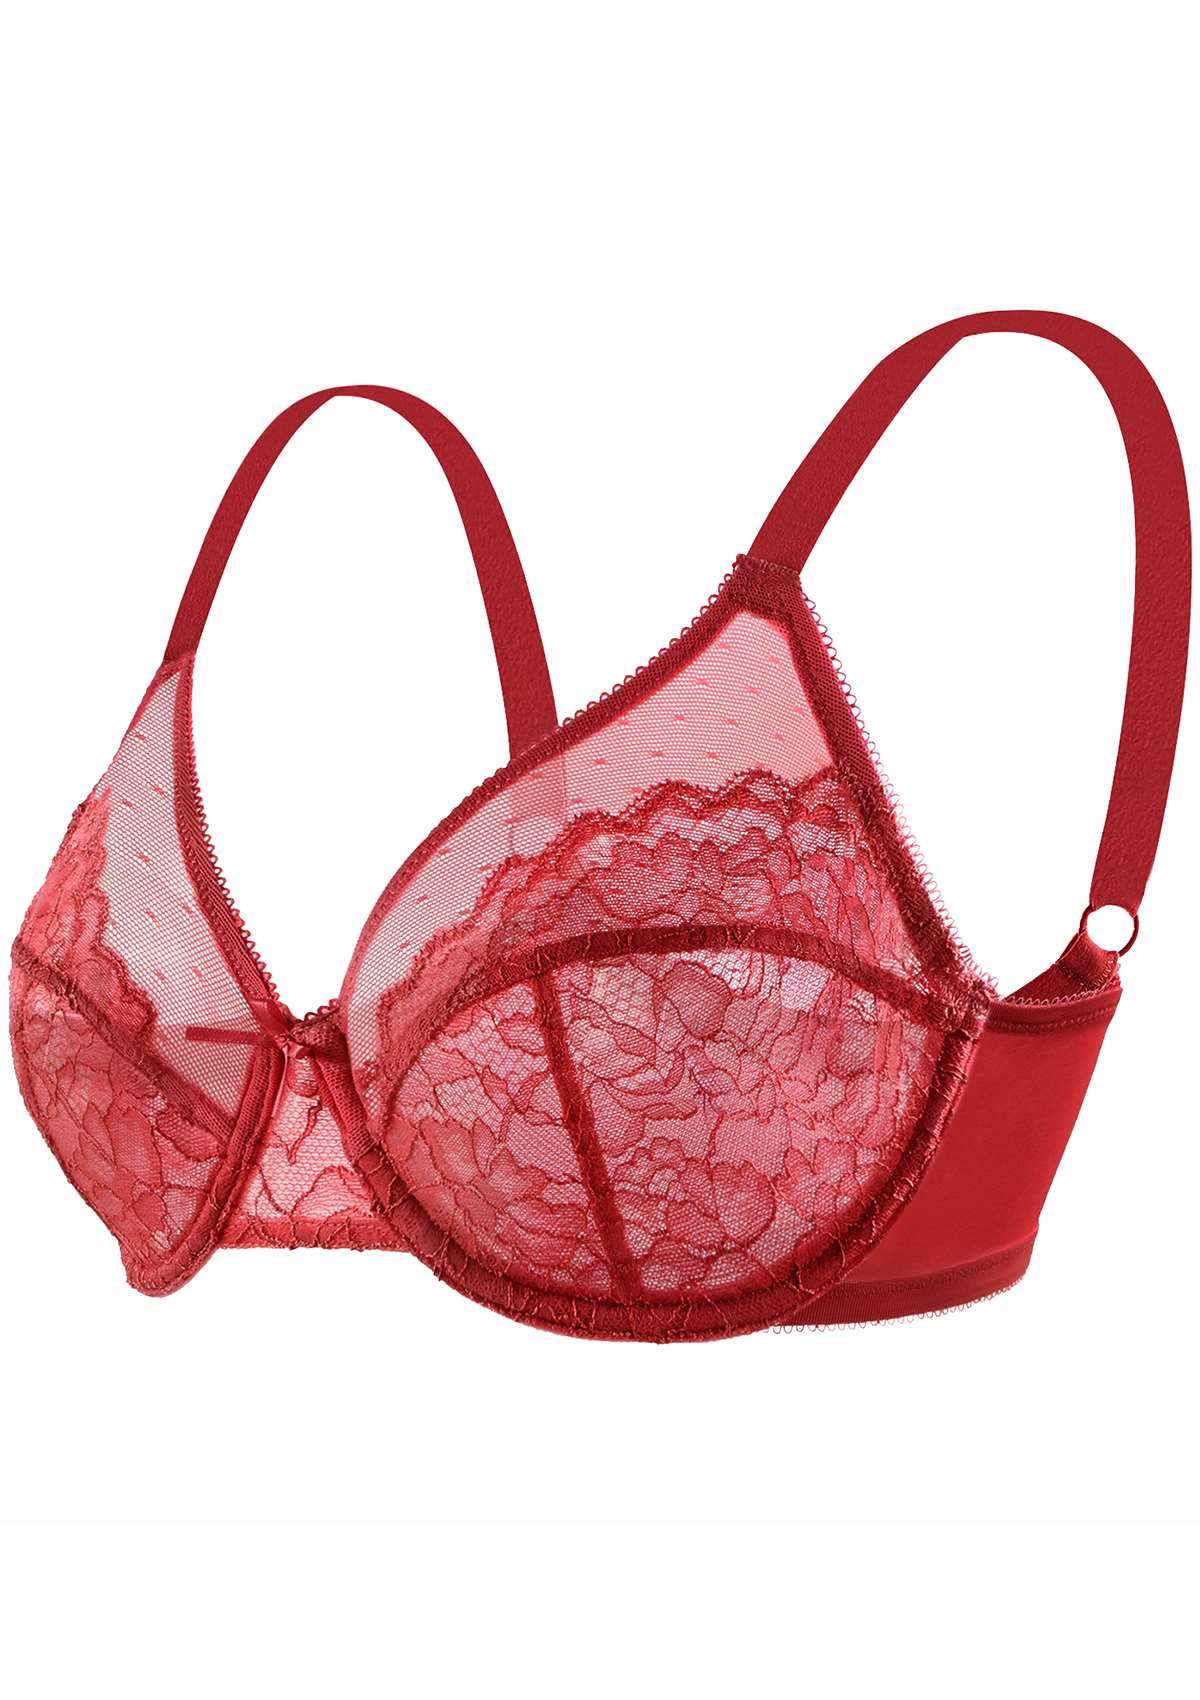 HSIA Enchante Full Support Lace Underwire Bra: Ideal For Big Breasts - Red / 34 / C